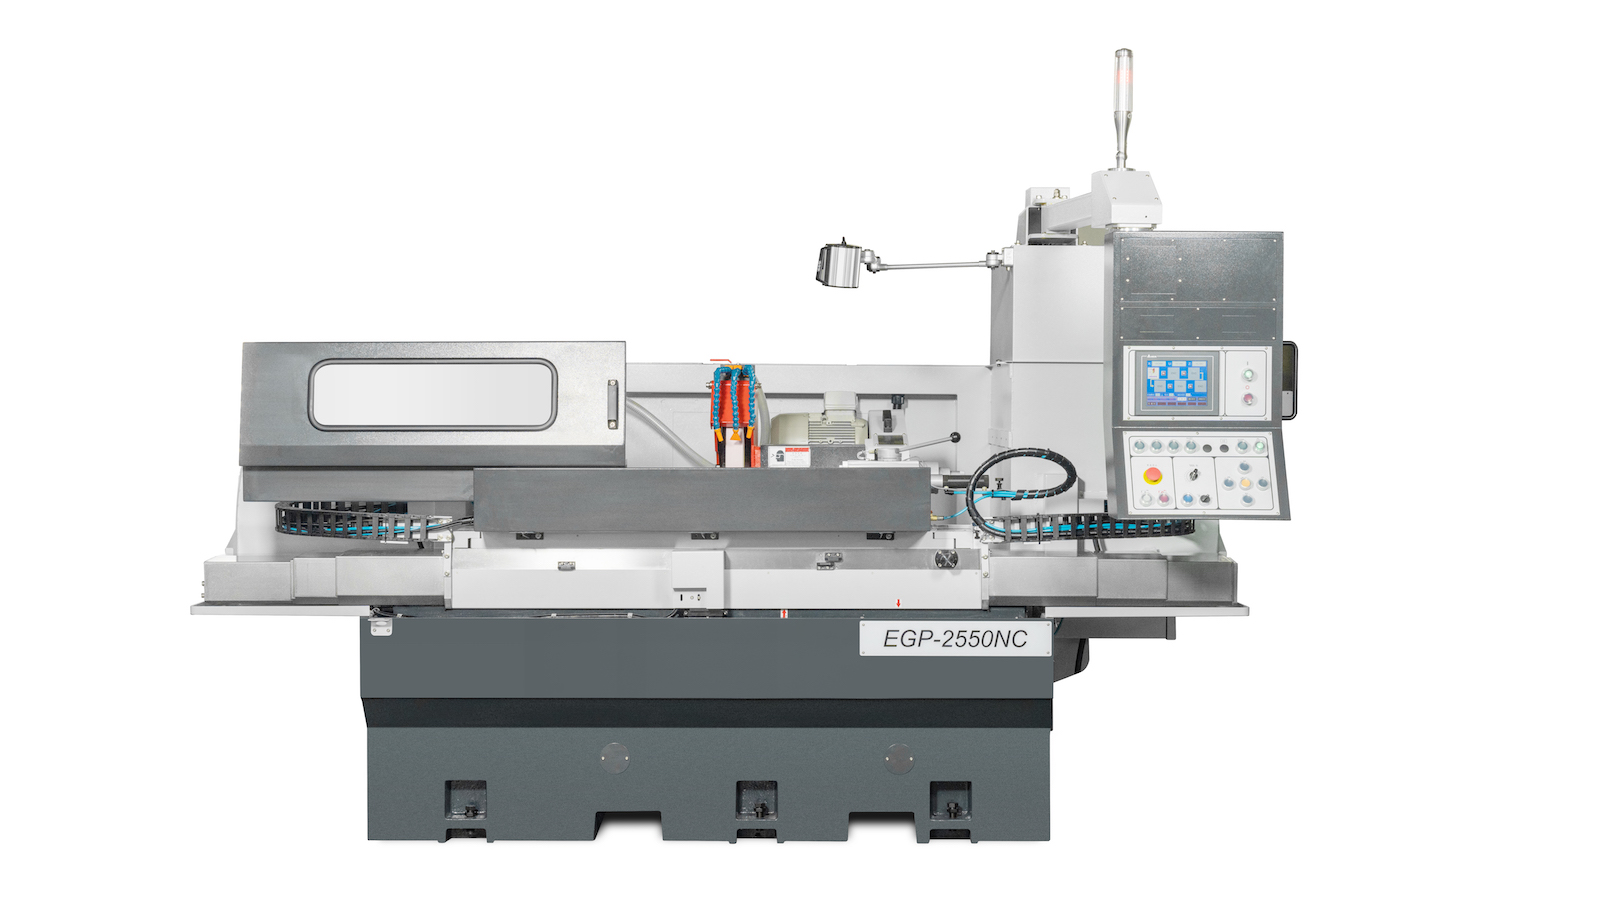 Suppliers of Automatic Infeed CNC Grinders